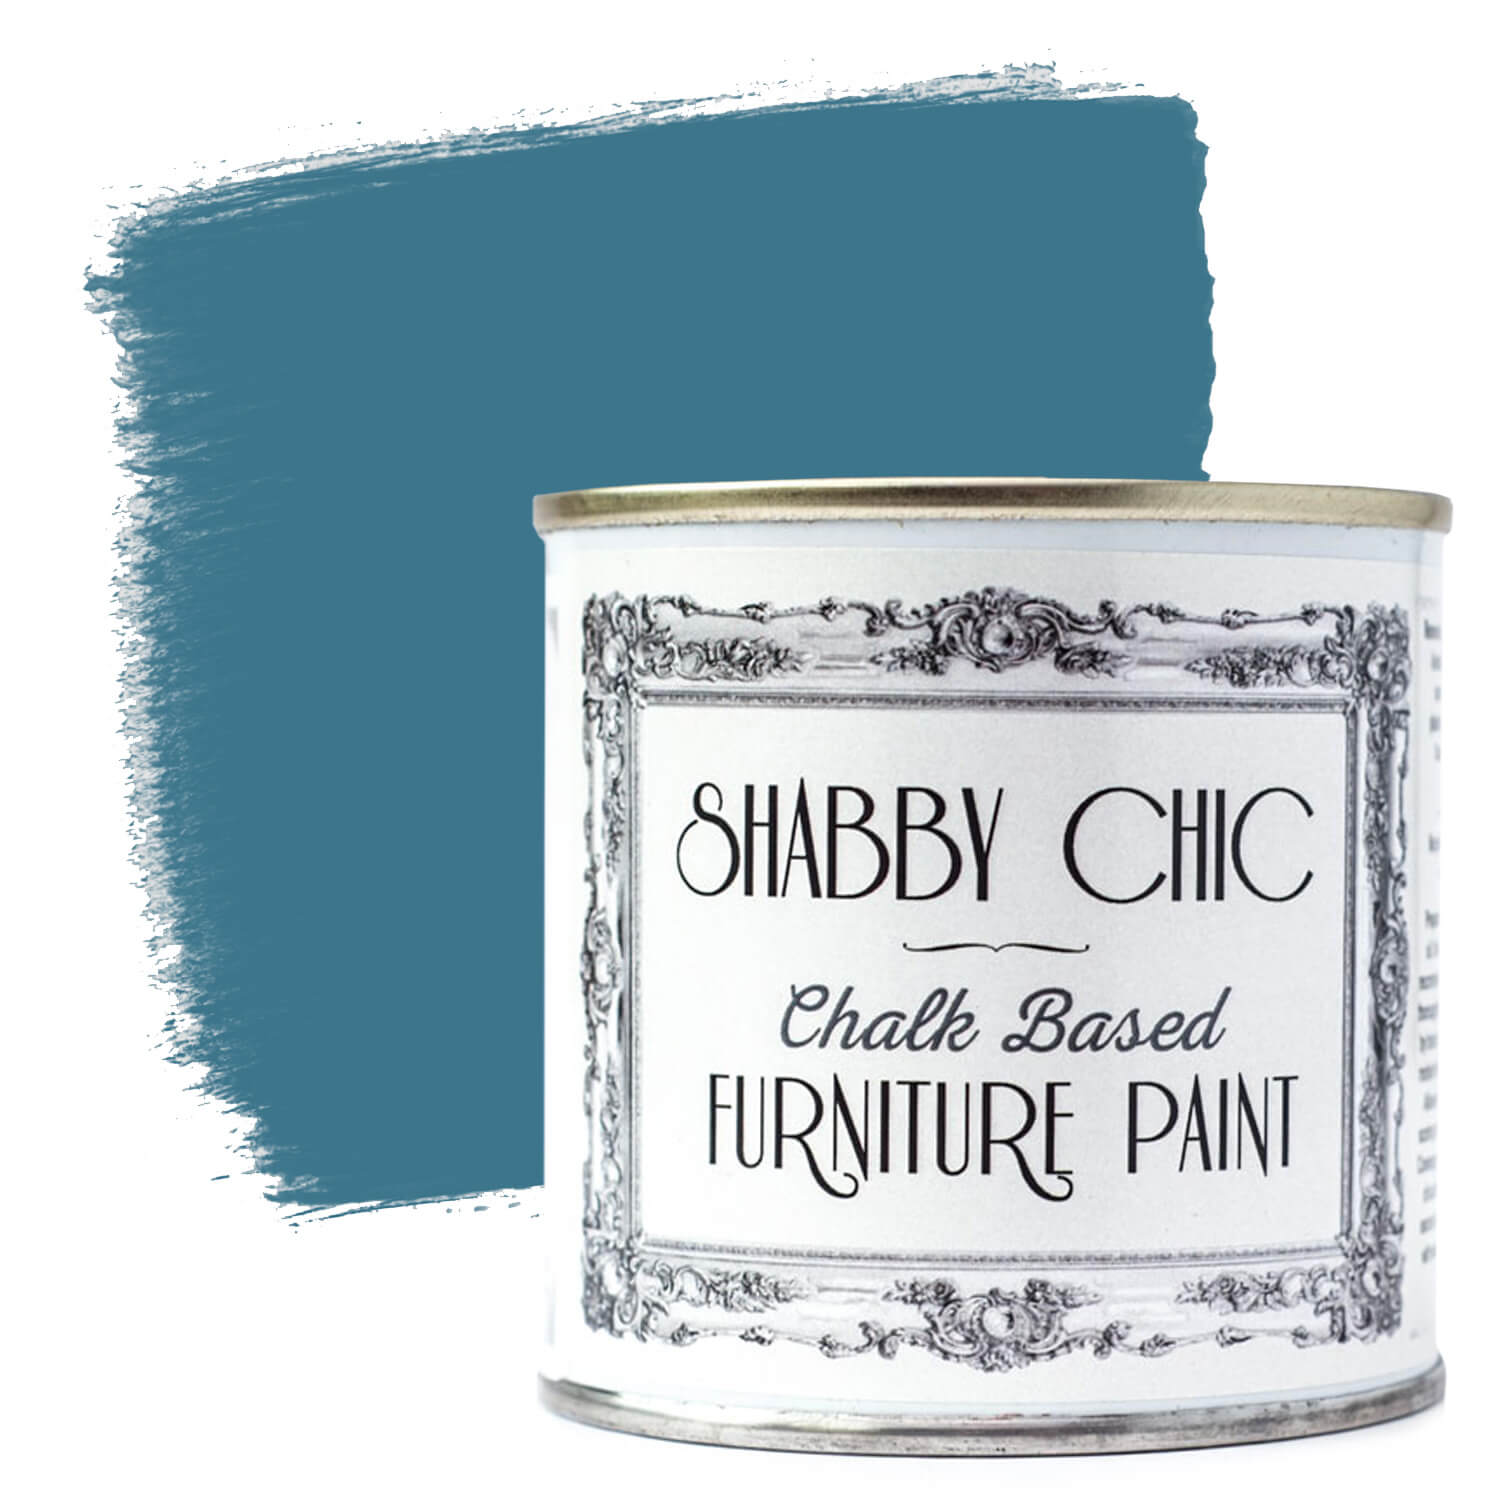 Cottage Green Shabby Chic Furniture Paint - The Liquid Chalk